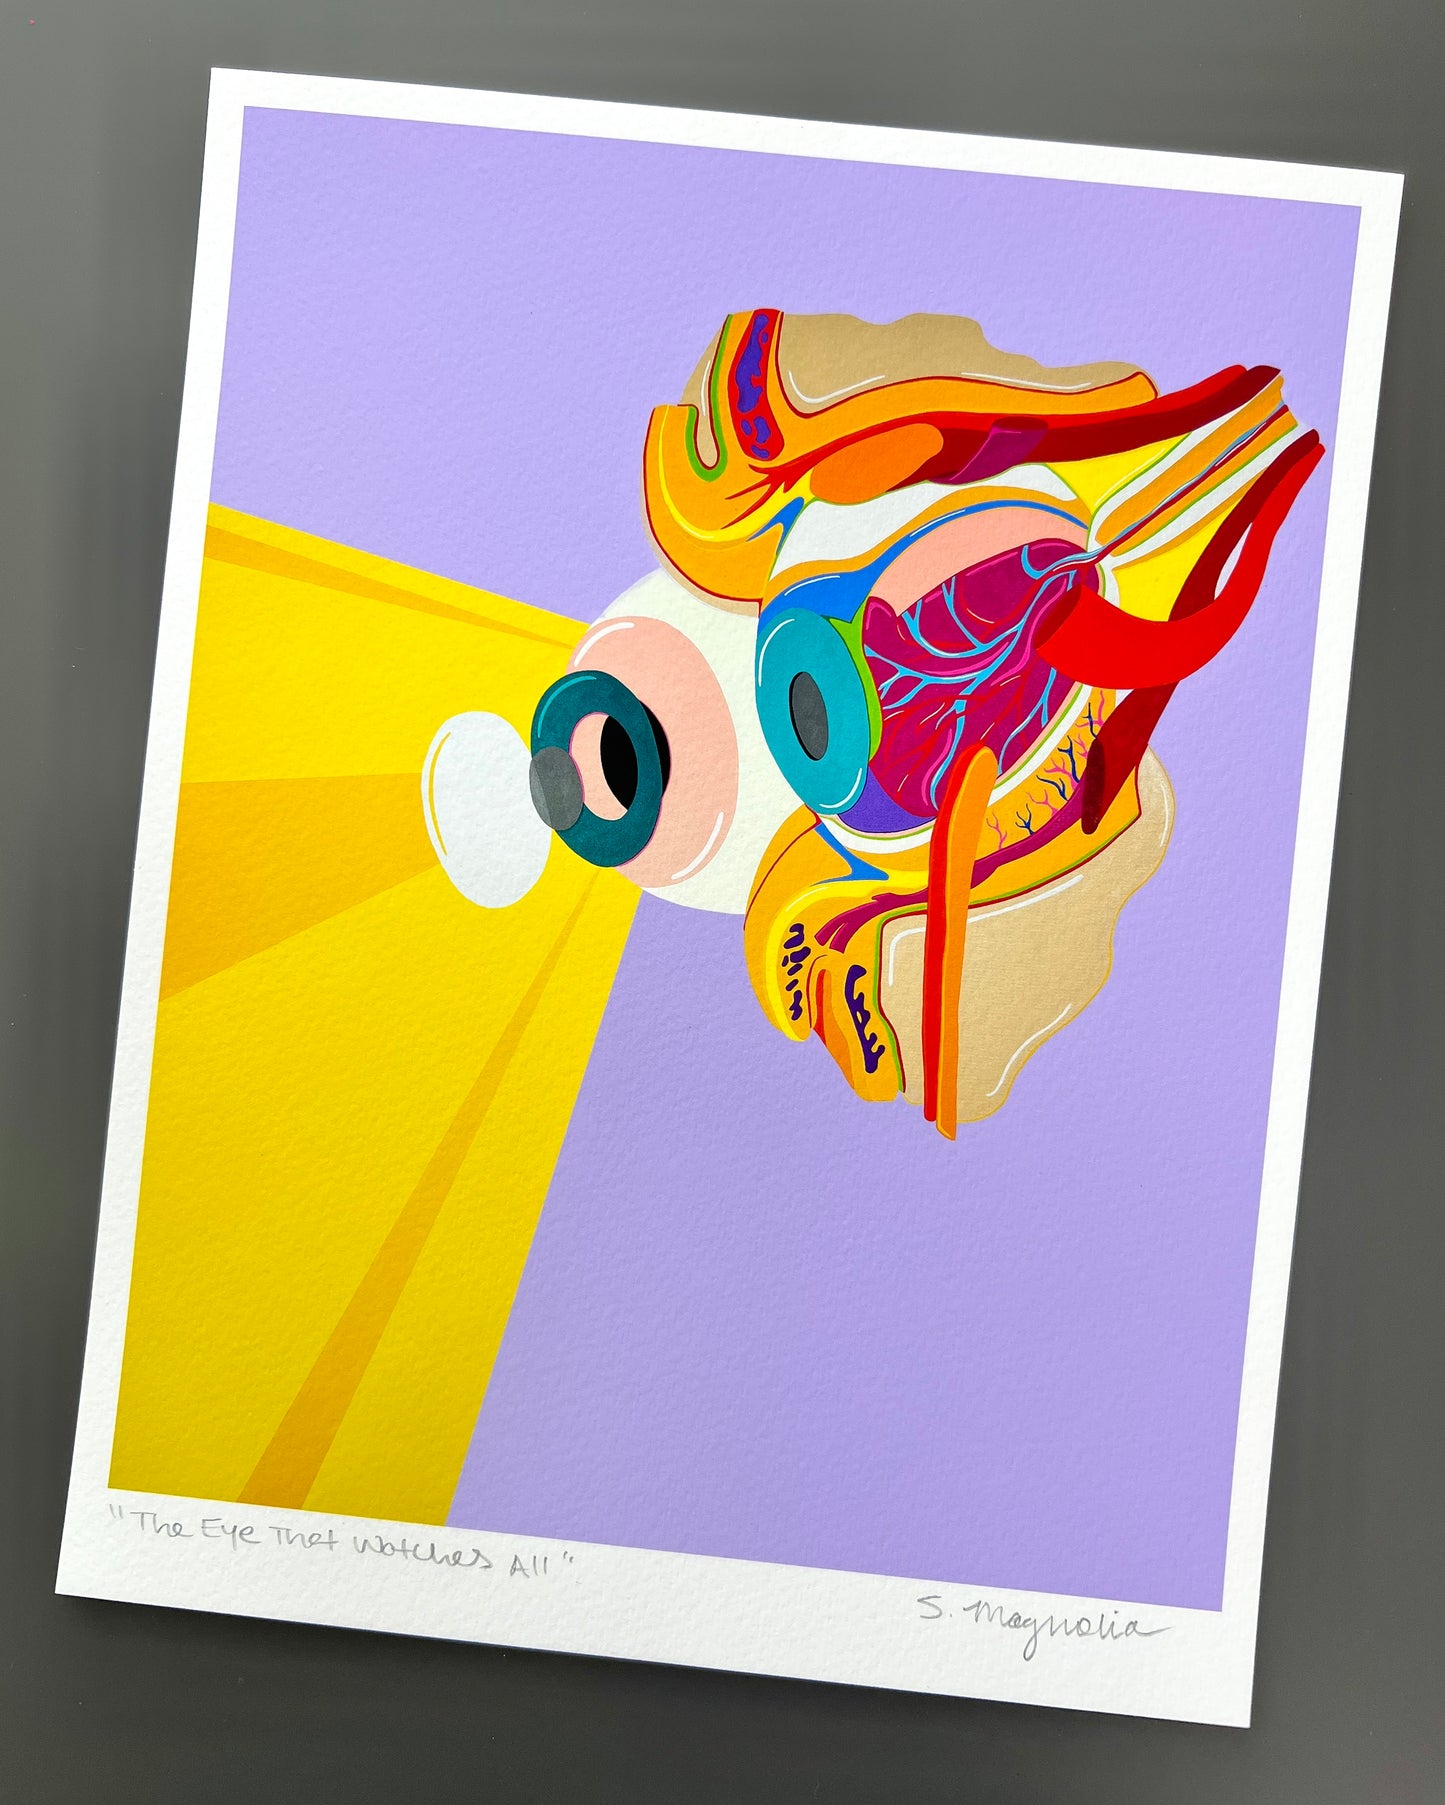 "The Eye That Watches All" Print